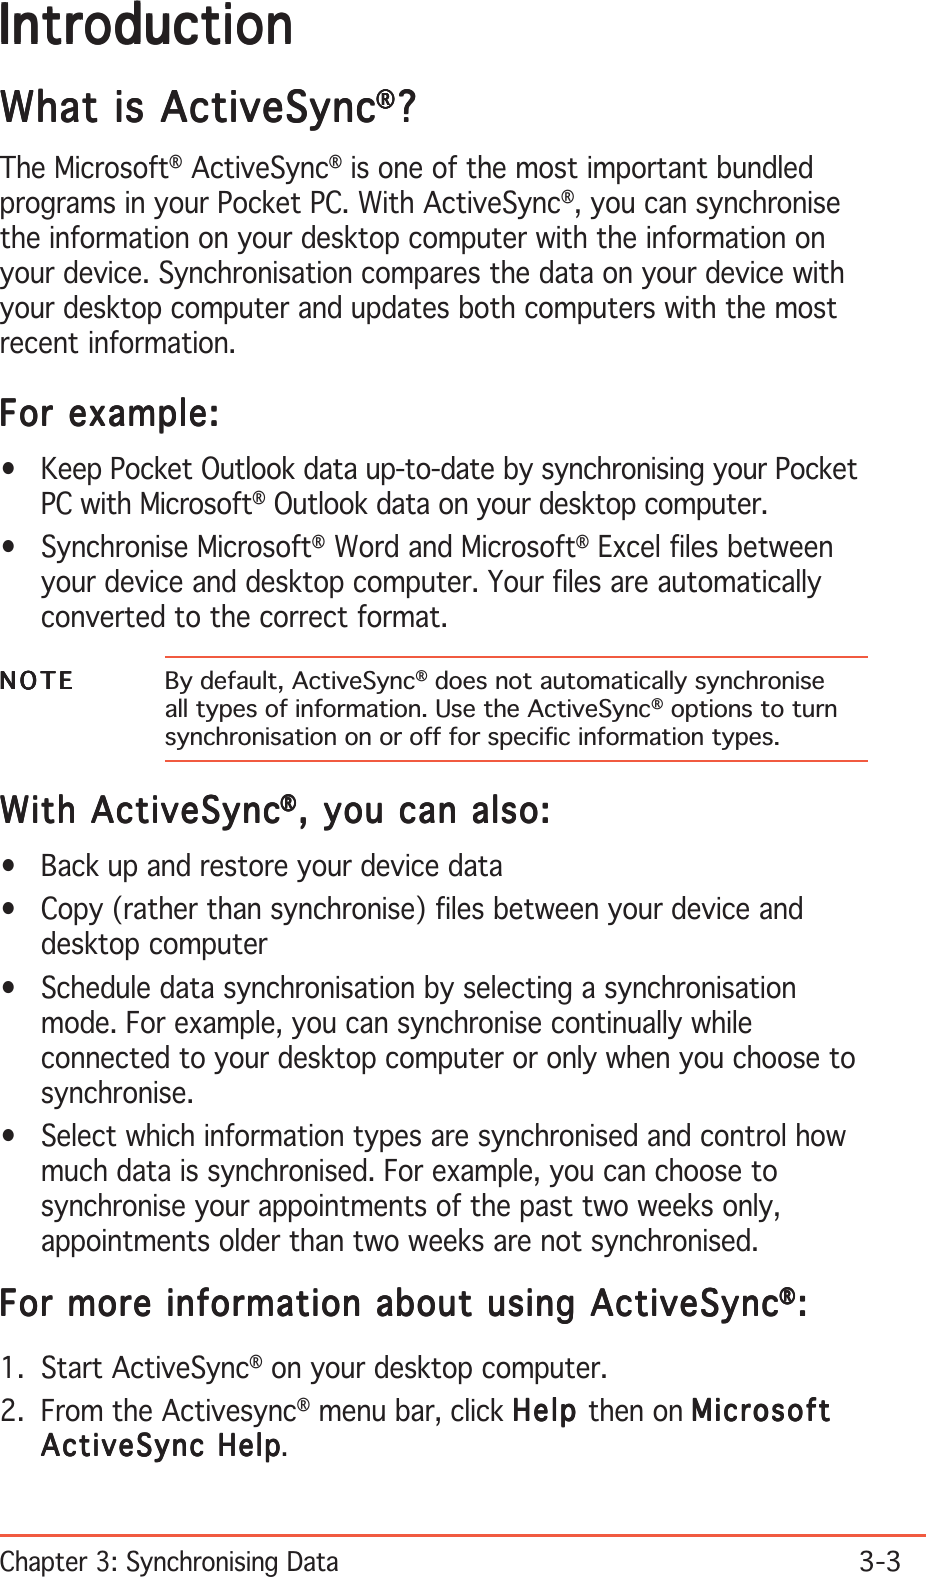 Chapter 3: Synchronising Data3-3IntroductionIntroductionIntroductionIntroductionIntroductionWhat is ActiveSyncWhat is ActiveSyncWhat is ActiveSyncWhat is ActiveSyncWhat is ActiveSync®®®®®?????The Microsoft® ActiveSync® is one of the most important bundledprograms in your Pocket PC. With ActiveSync®, you can synchronisethe information on your desktop computer with the information onyour device. Synchronisation compares the data on your device withyour desktop computer and updates both computers with the mostrecent information.For example:For example:For example:For example:For example:• Keep Pocket Outlook data up-to-date by synchronising your PocketPC with Microsoft® Outlook data on your desktop computer.• Synchronise Microsoft® Word and Microsoft® Excel files betweenyour device and desktop computer. Your files are automaticallyconverted to the correct format.NOTENOTENOTENOTEN O T E By default, ActiveSync® does not automatically synchroniseall types of information. Use the ActiveSync® options to turnsynchronisation on or off for specific information types.With ActiveSyncWith ActiveSyncWith ActiveSyncWith ActiveSyncWith ActiveSync®®®®®, you can also:, you can also:, you can also:, you can also:, you can also:• Back up and restore your device data• Copy (rather than synchronise) files between your device anddesktop computer• Schedule data synchronisation by selecting a synchronisationmode. For example, you can synchronise continually whileconnected to your desktop computer or only when you choose tosynchronise.• Select which information types are synchronised and control howmuch data is synchronised. For example, you can choose tosynchronise your appointments of the past two weeks only,appointments older than two weeks are not synchronised.For more information about using ActiveSyncFor more information about using ActiveSyncFor more information about using ActiveSyncFor more information about using ActiveSyncFor more information about using ActiveSync®®®®®:::::1. Start ActiveSync® on your desktop computer.2. From the Activesync® menu bar, click HelpHelpHelpHelpHelp then on MicrosoftMicrosoftMicrosoftMicrosoftMicrosoftActiveSync HelpActiveSync HelpActiveSync HelpActiveSync HelpActiveSync Help.